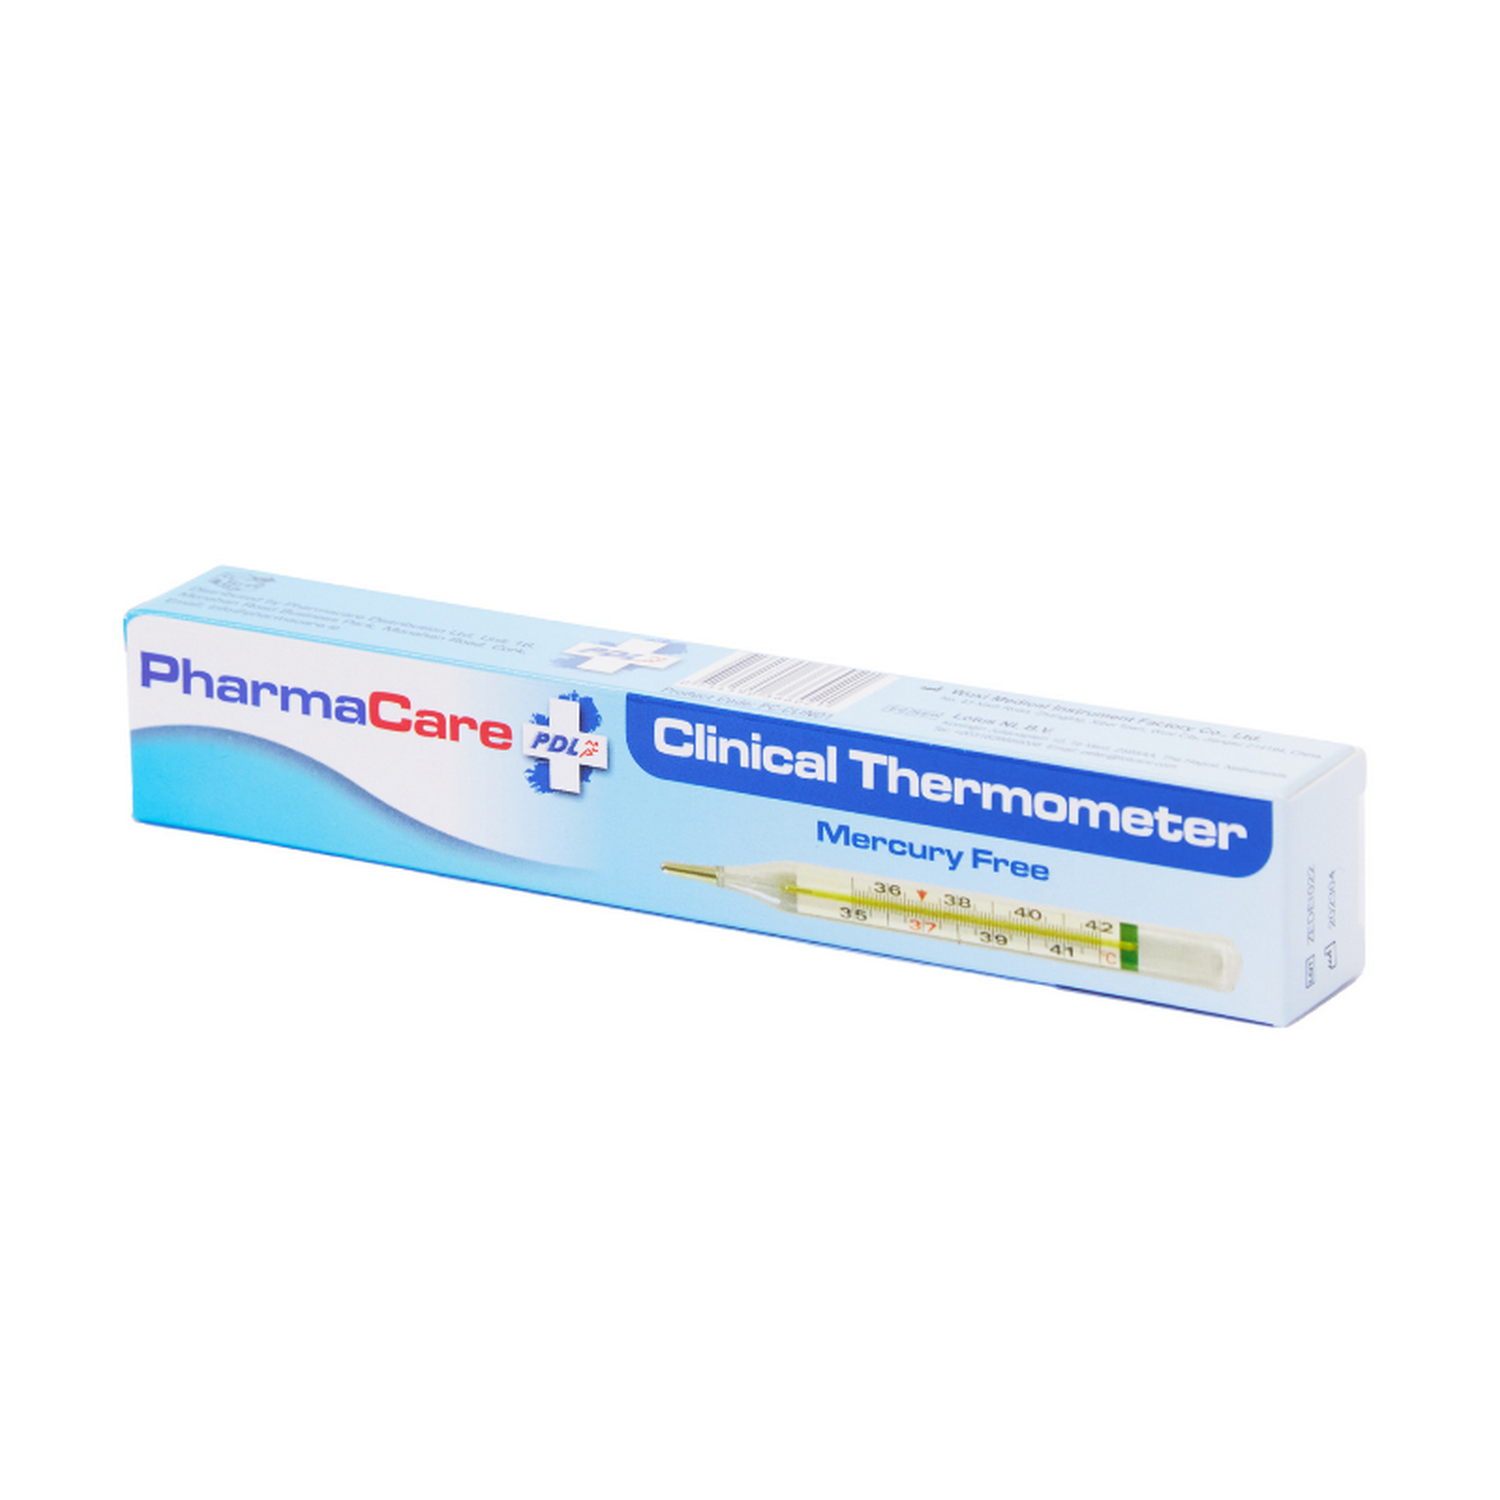 Pharmacare Clinical Thermometer